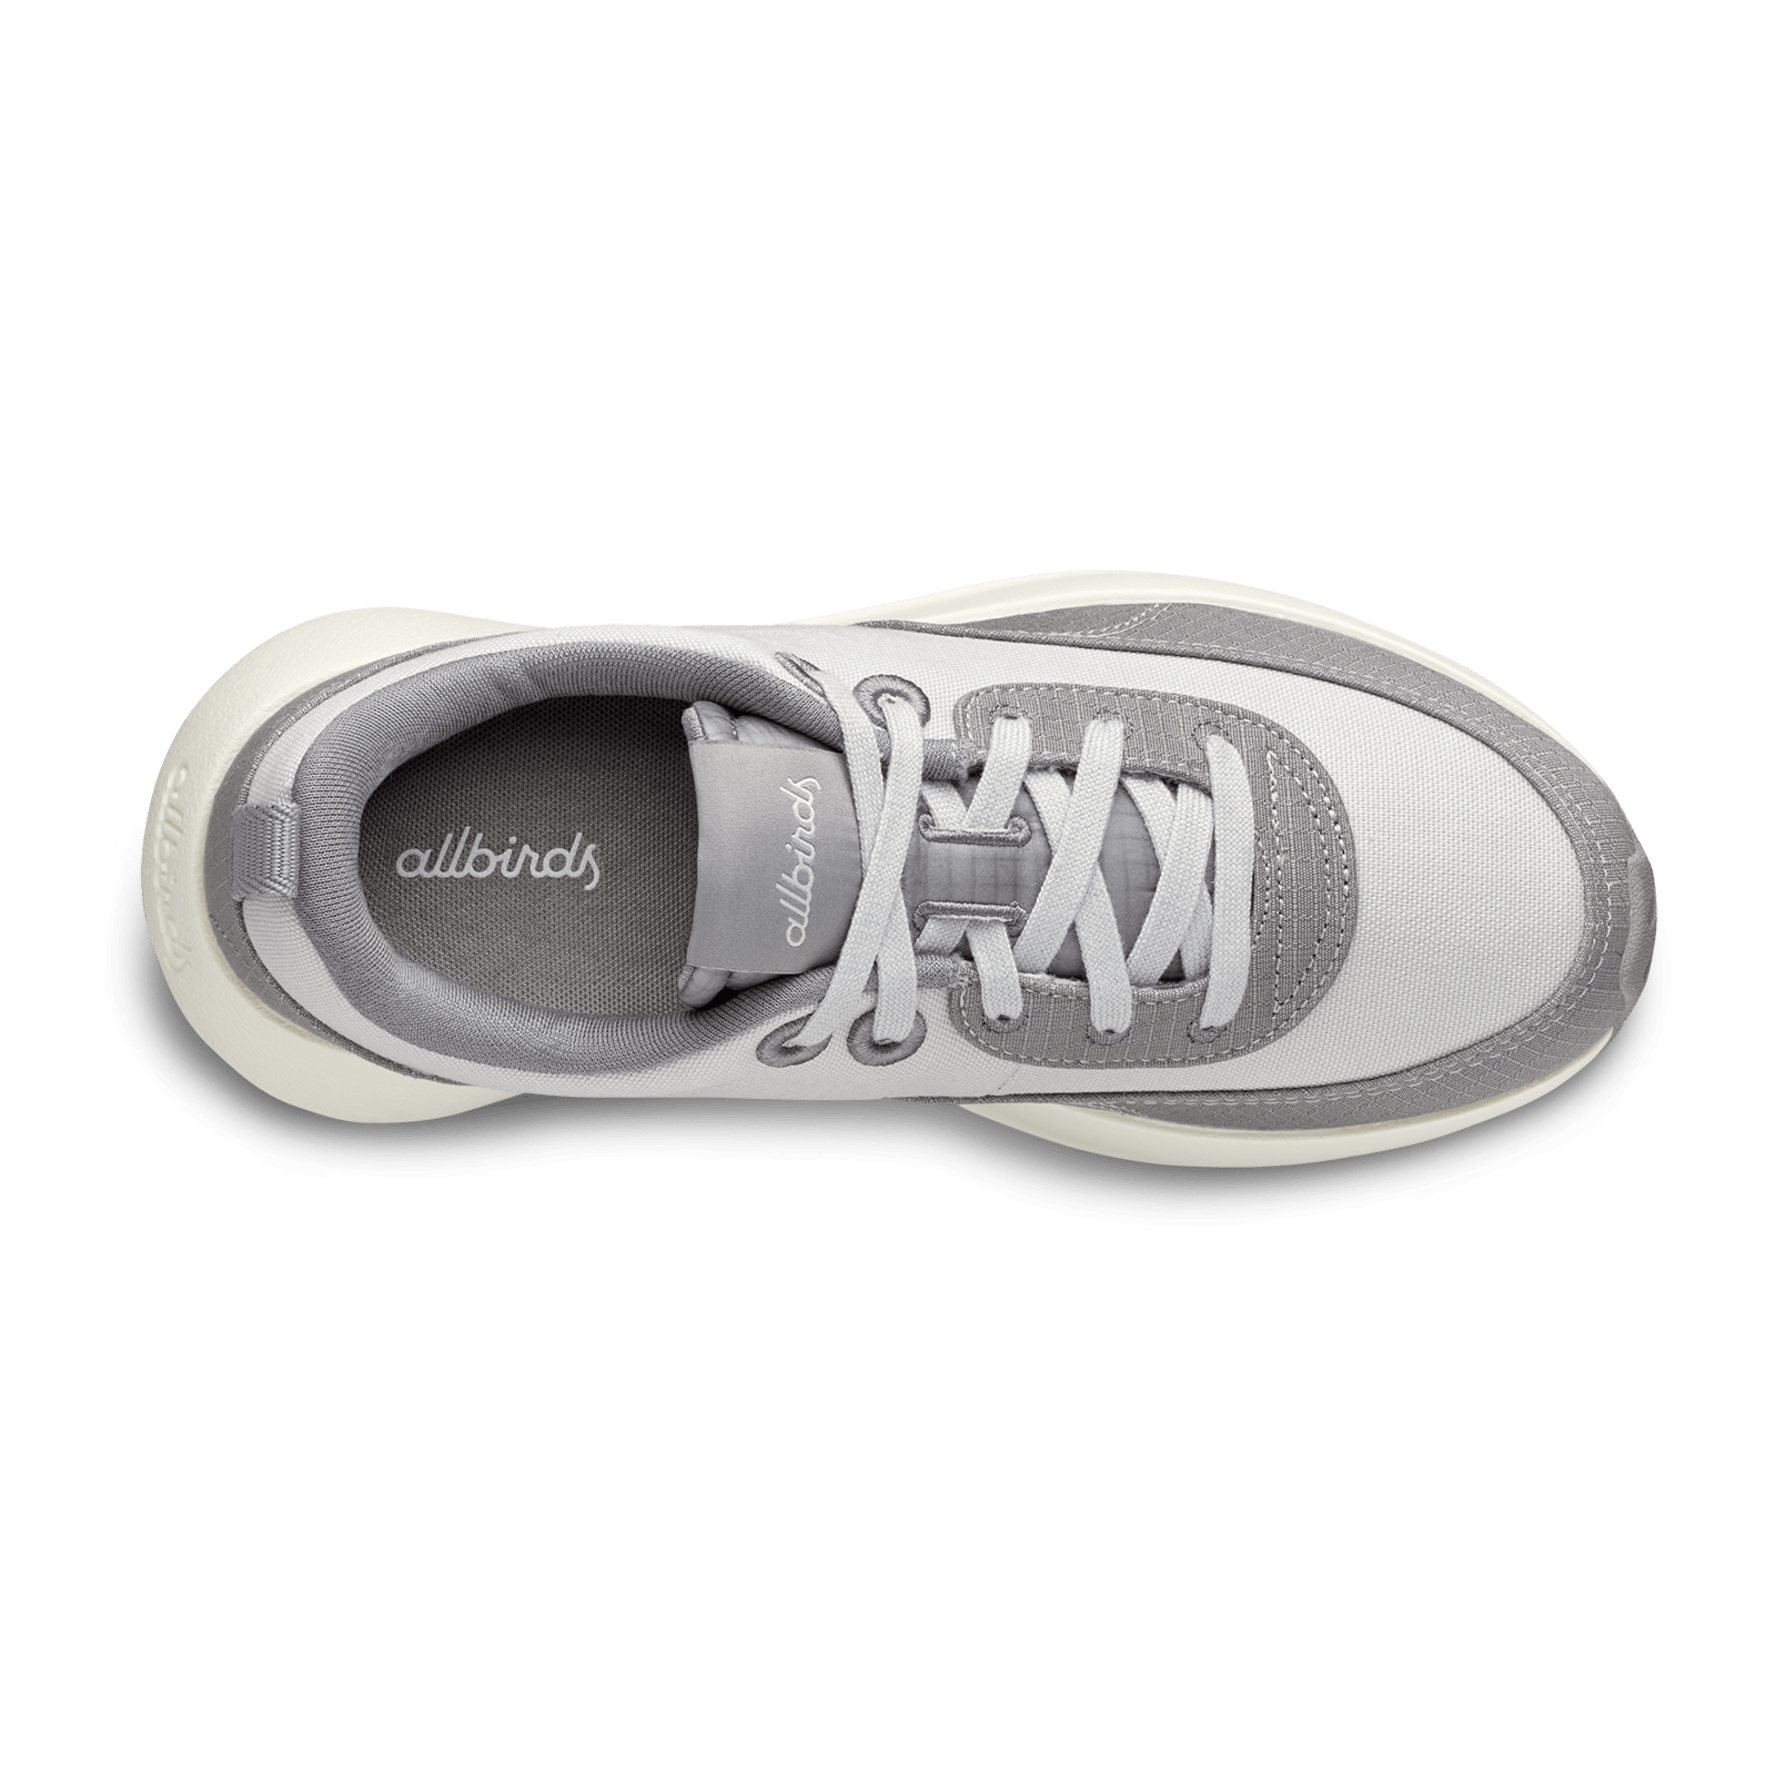 Women's Couriers - Medium Grey/Light Grey (Natural White Sole)